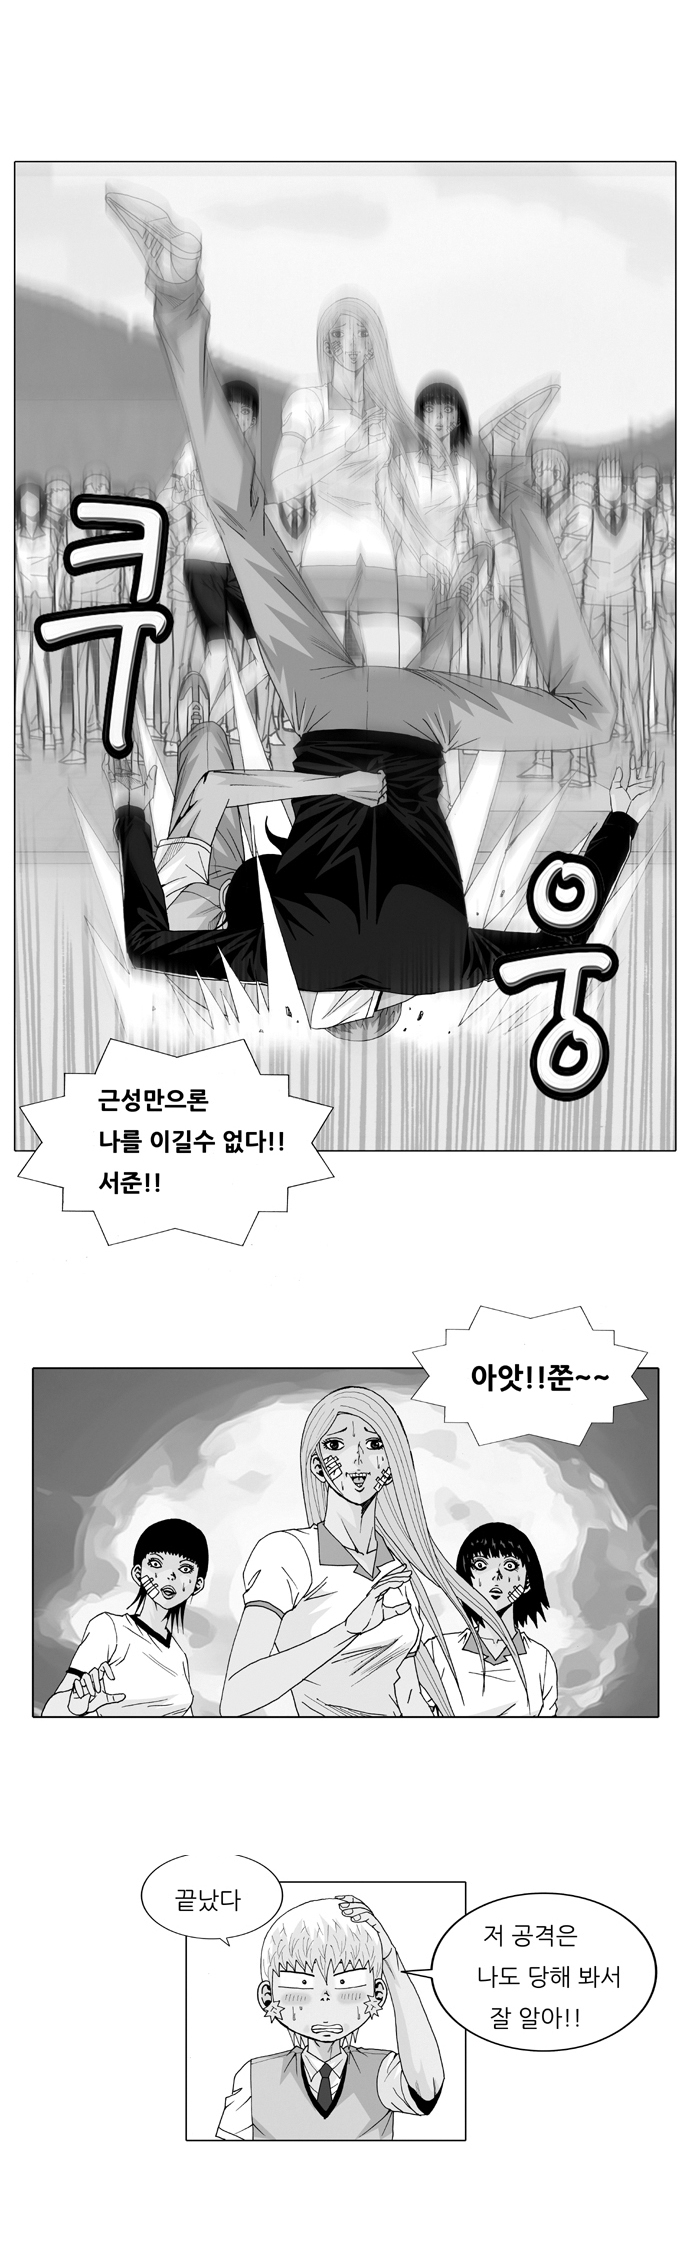 Ultimate Legend - Kang Hae Hyo - Chapter 25 - Page 1